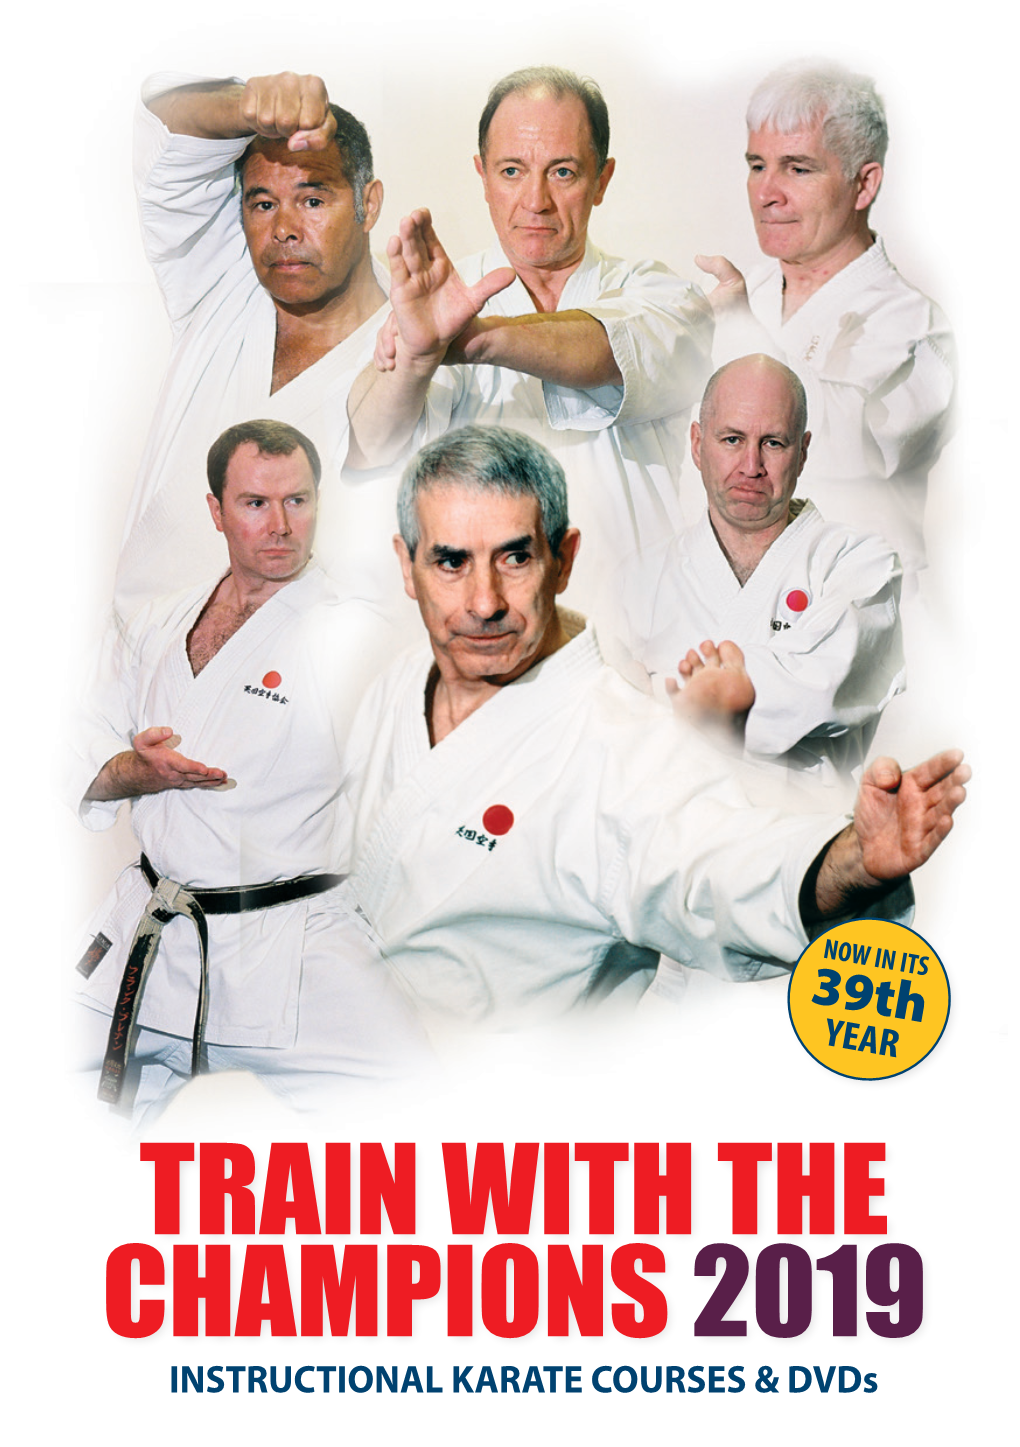 Train with the Champions 2019